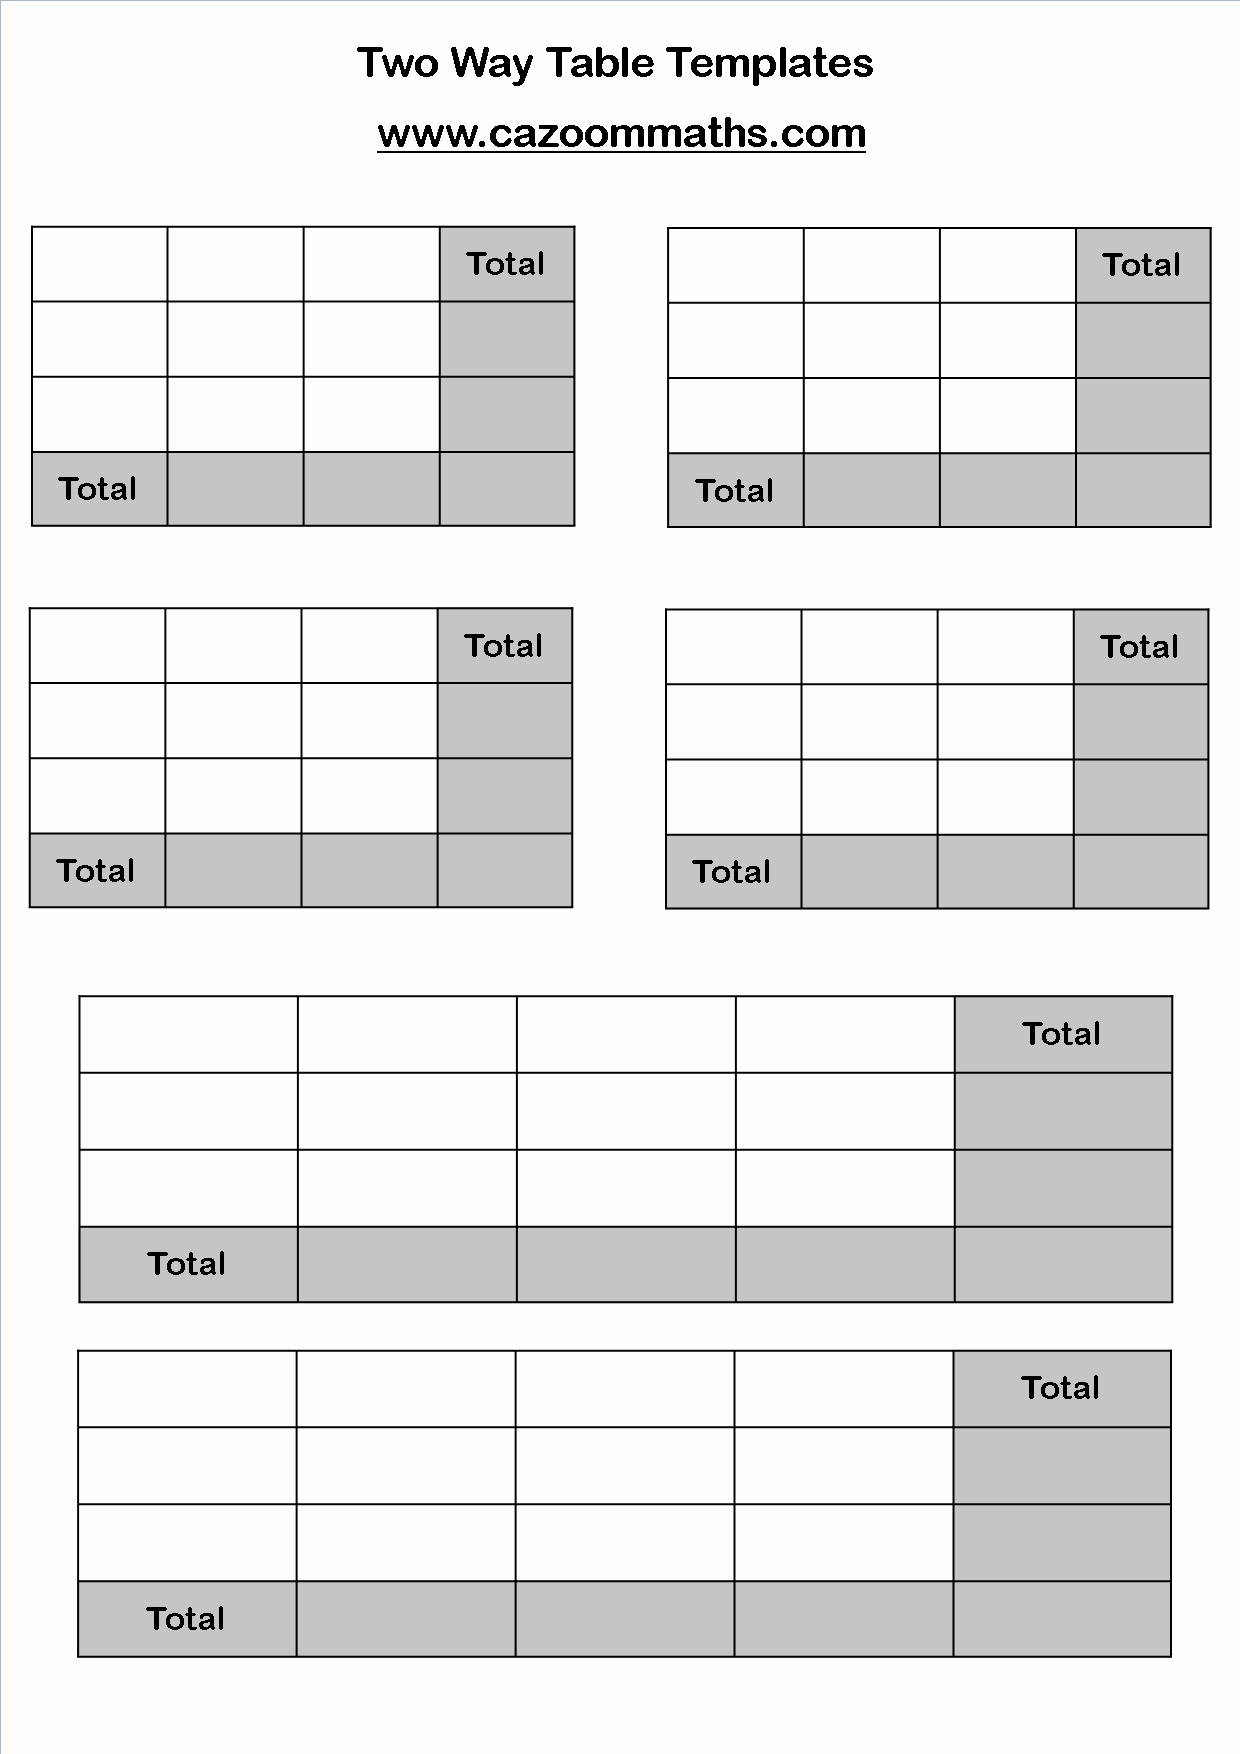 Two Way Frequency Table Worksheet Beautiful Two Way Tables and Pictograms